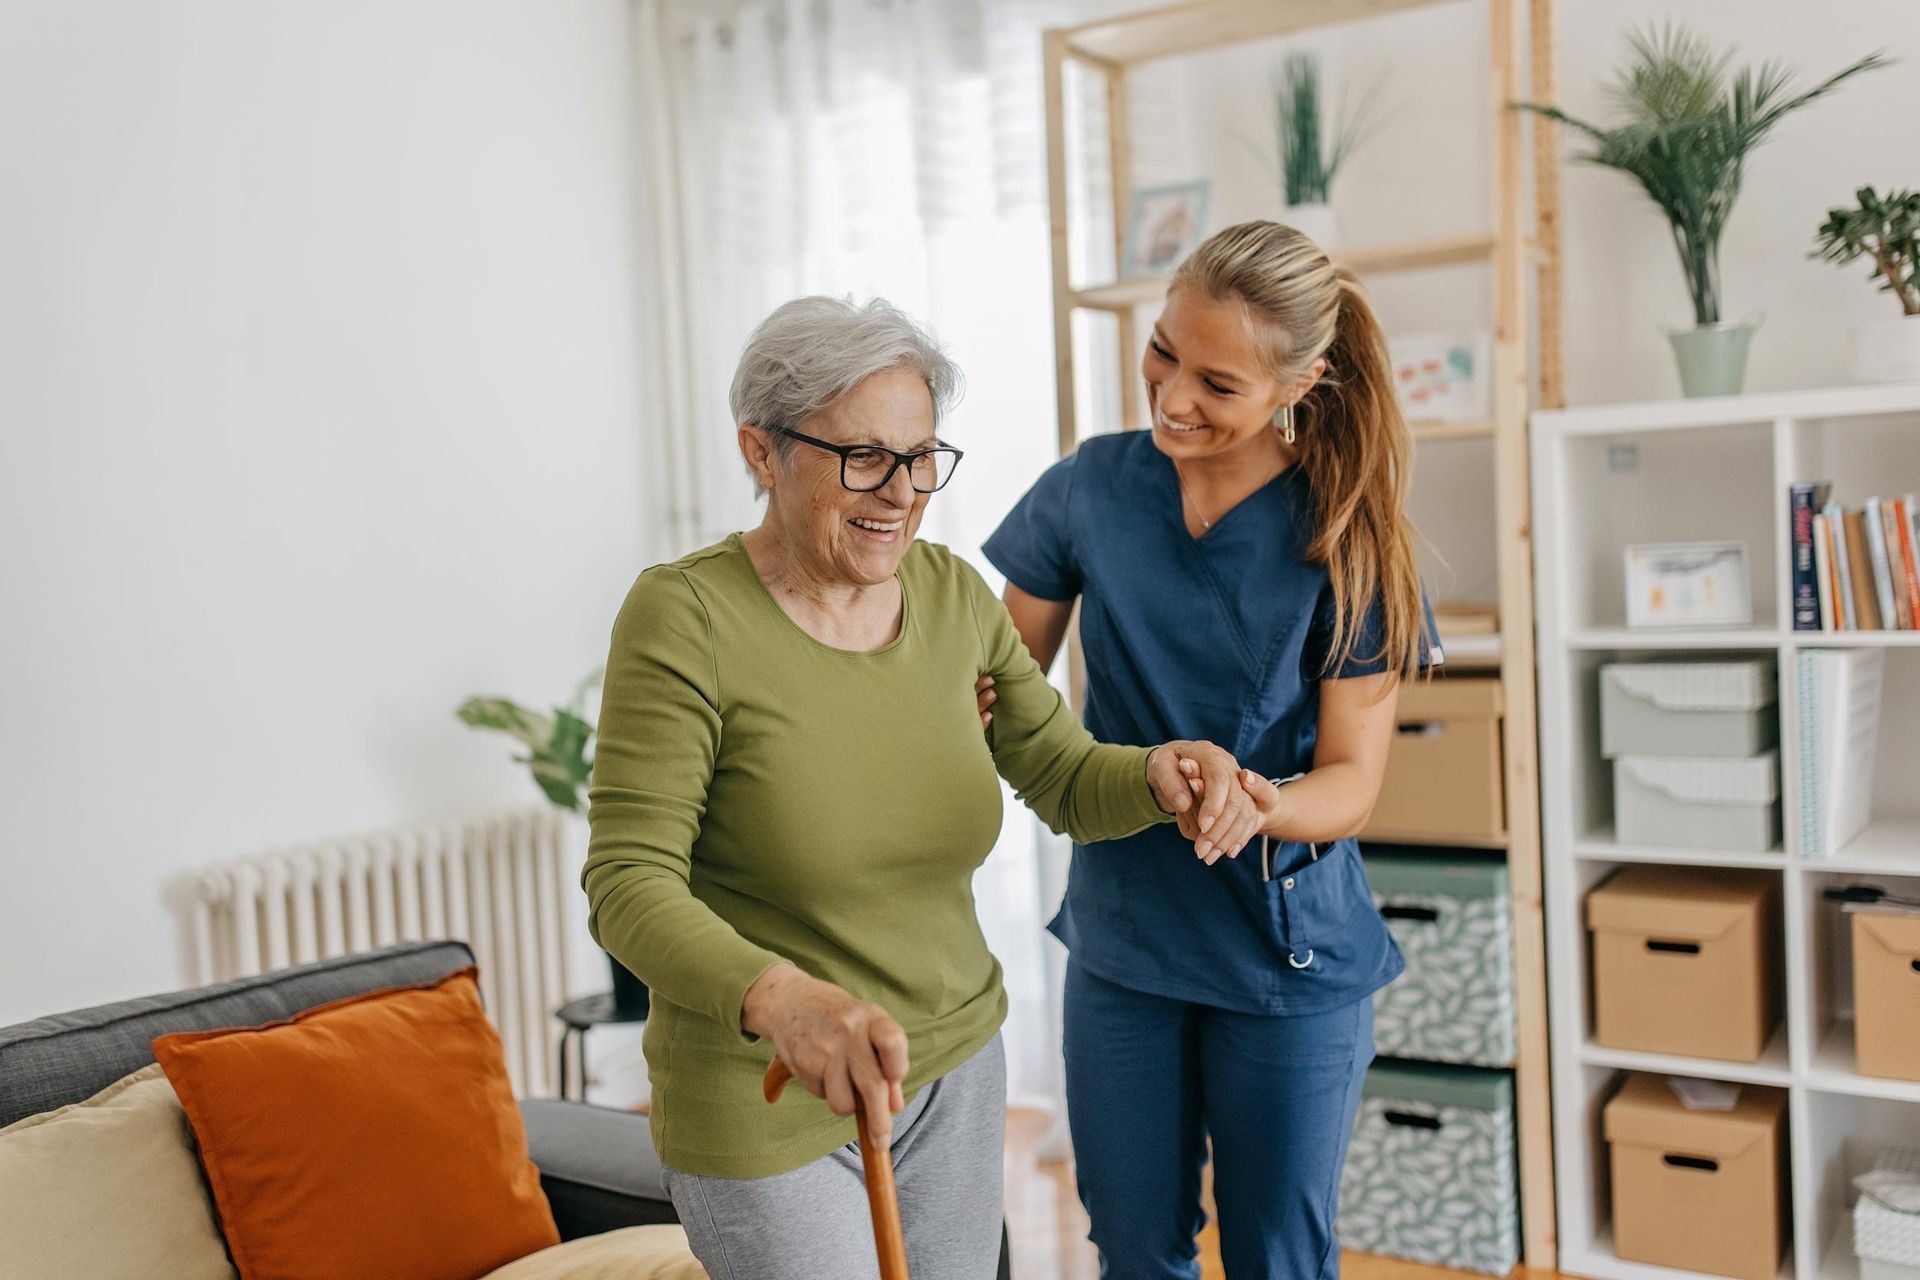 Female caregiver helping and supporting senior patient to walk — Birmingham, AL — Helping Hand Services Inc